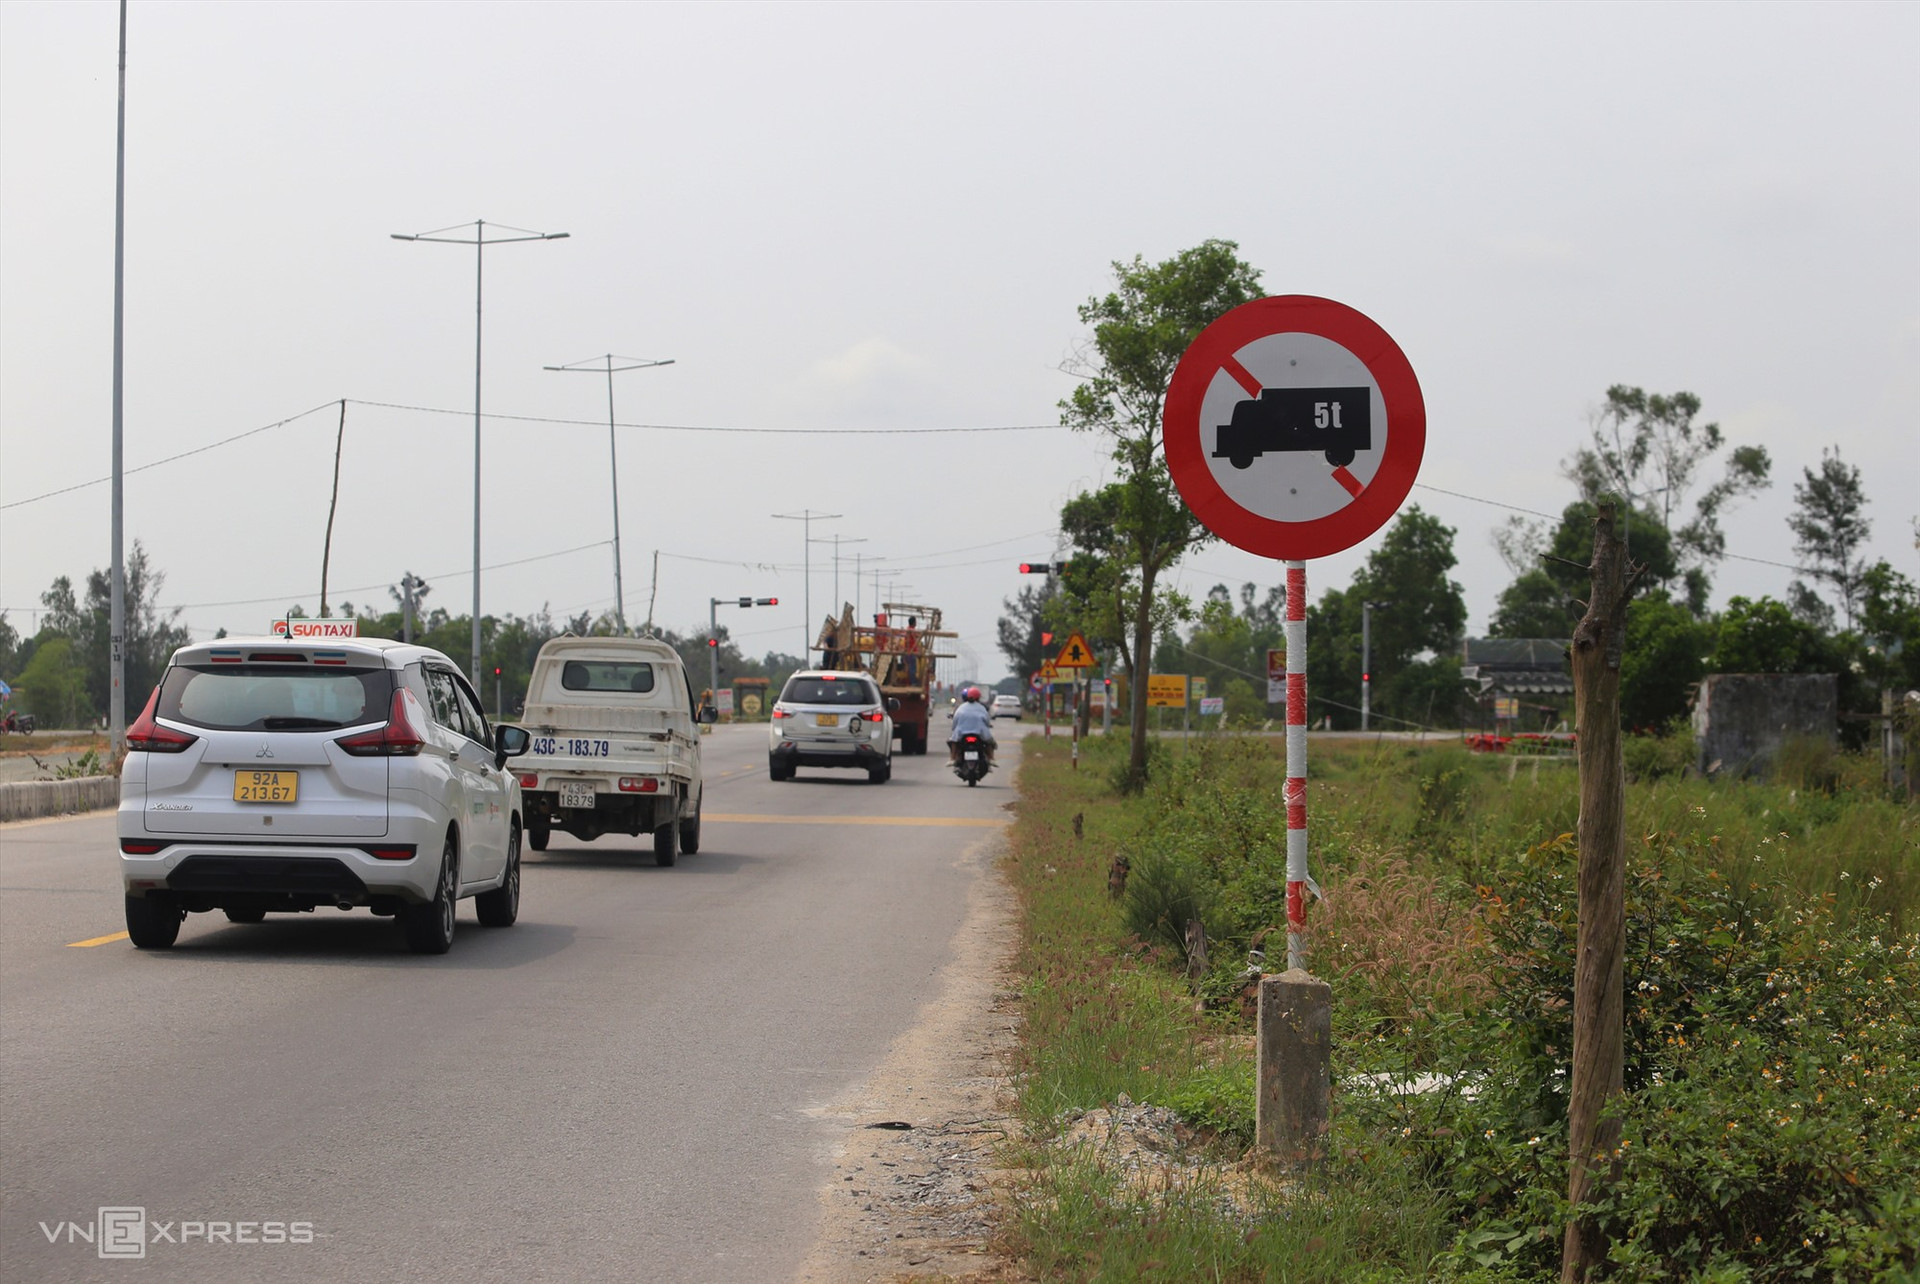 The road is designed at level 2 of the plain scale at a speed of 70 km/h. It helps shorten the distance between Danang and Tam Ky (Quang Nam) and reduce traffic pressure on National Highway 1A. The road includes two sides of four lanes and a 2.5-metre median strip. The sidewalk is 7.5 metres wide.